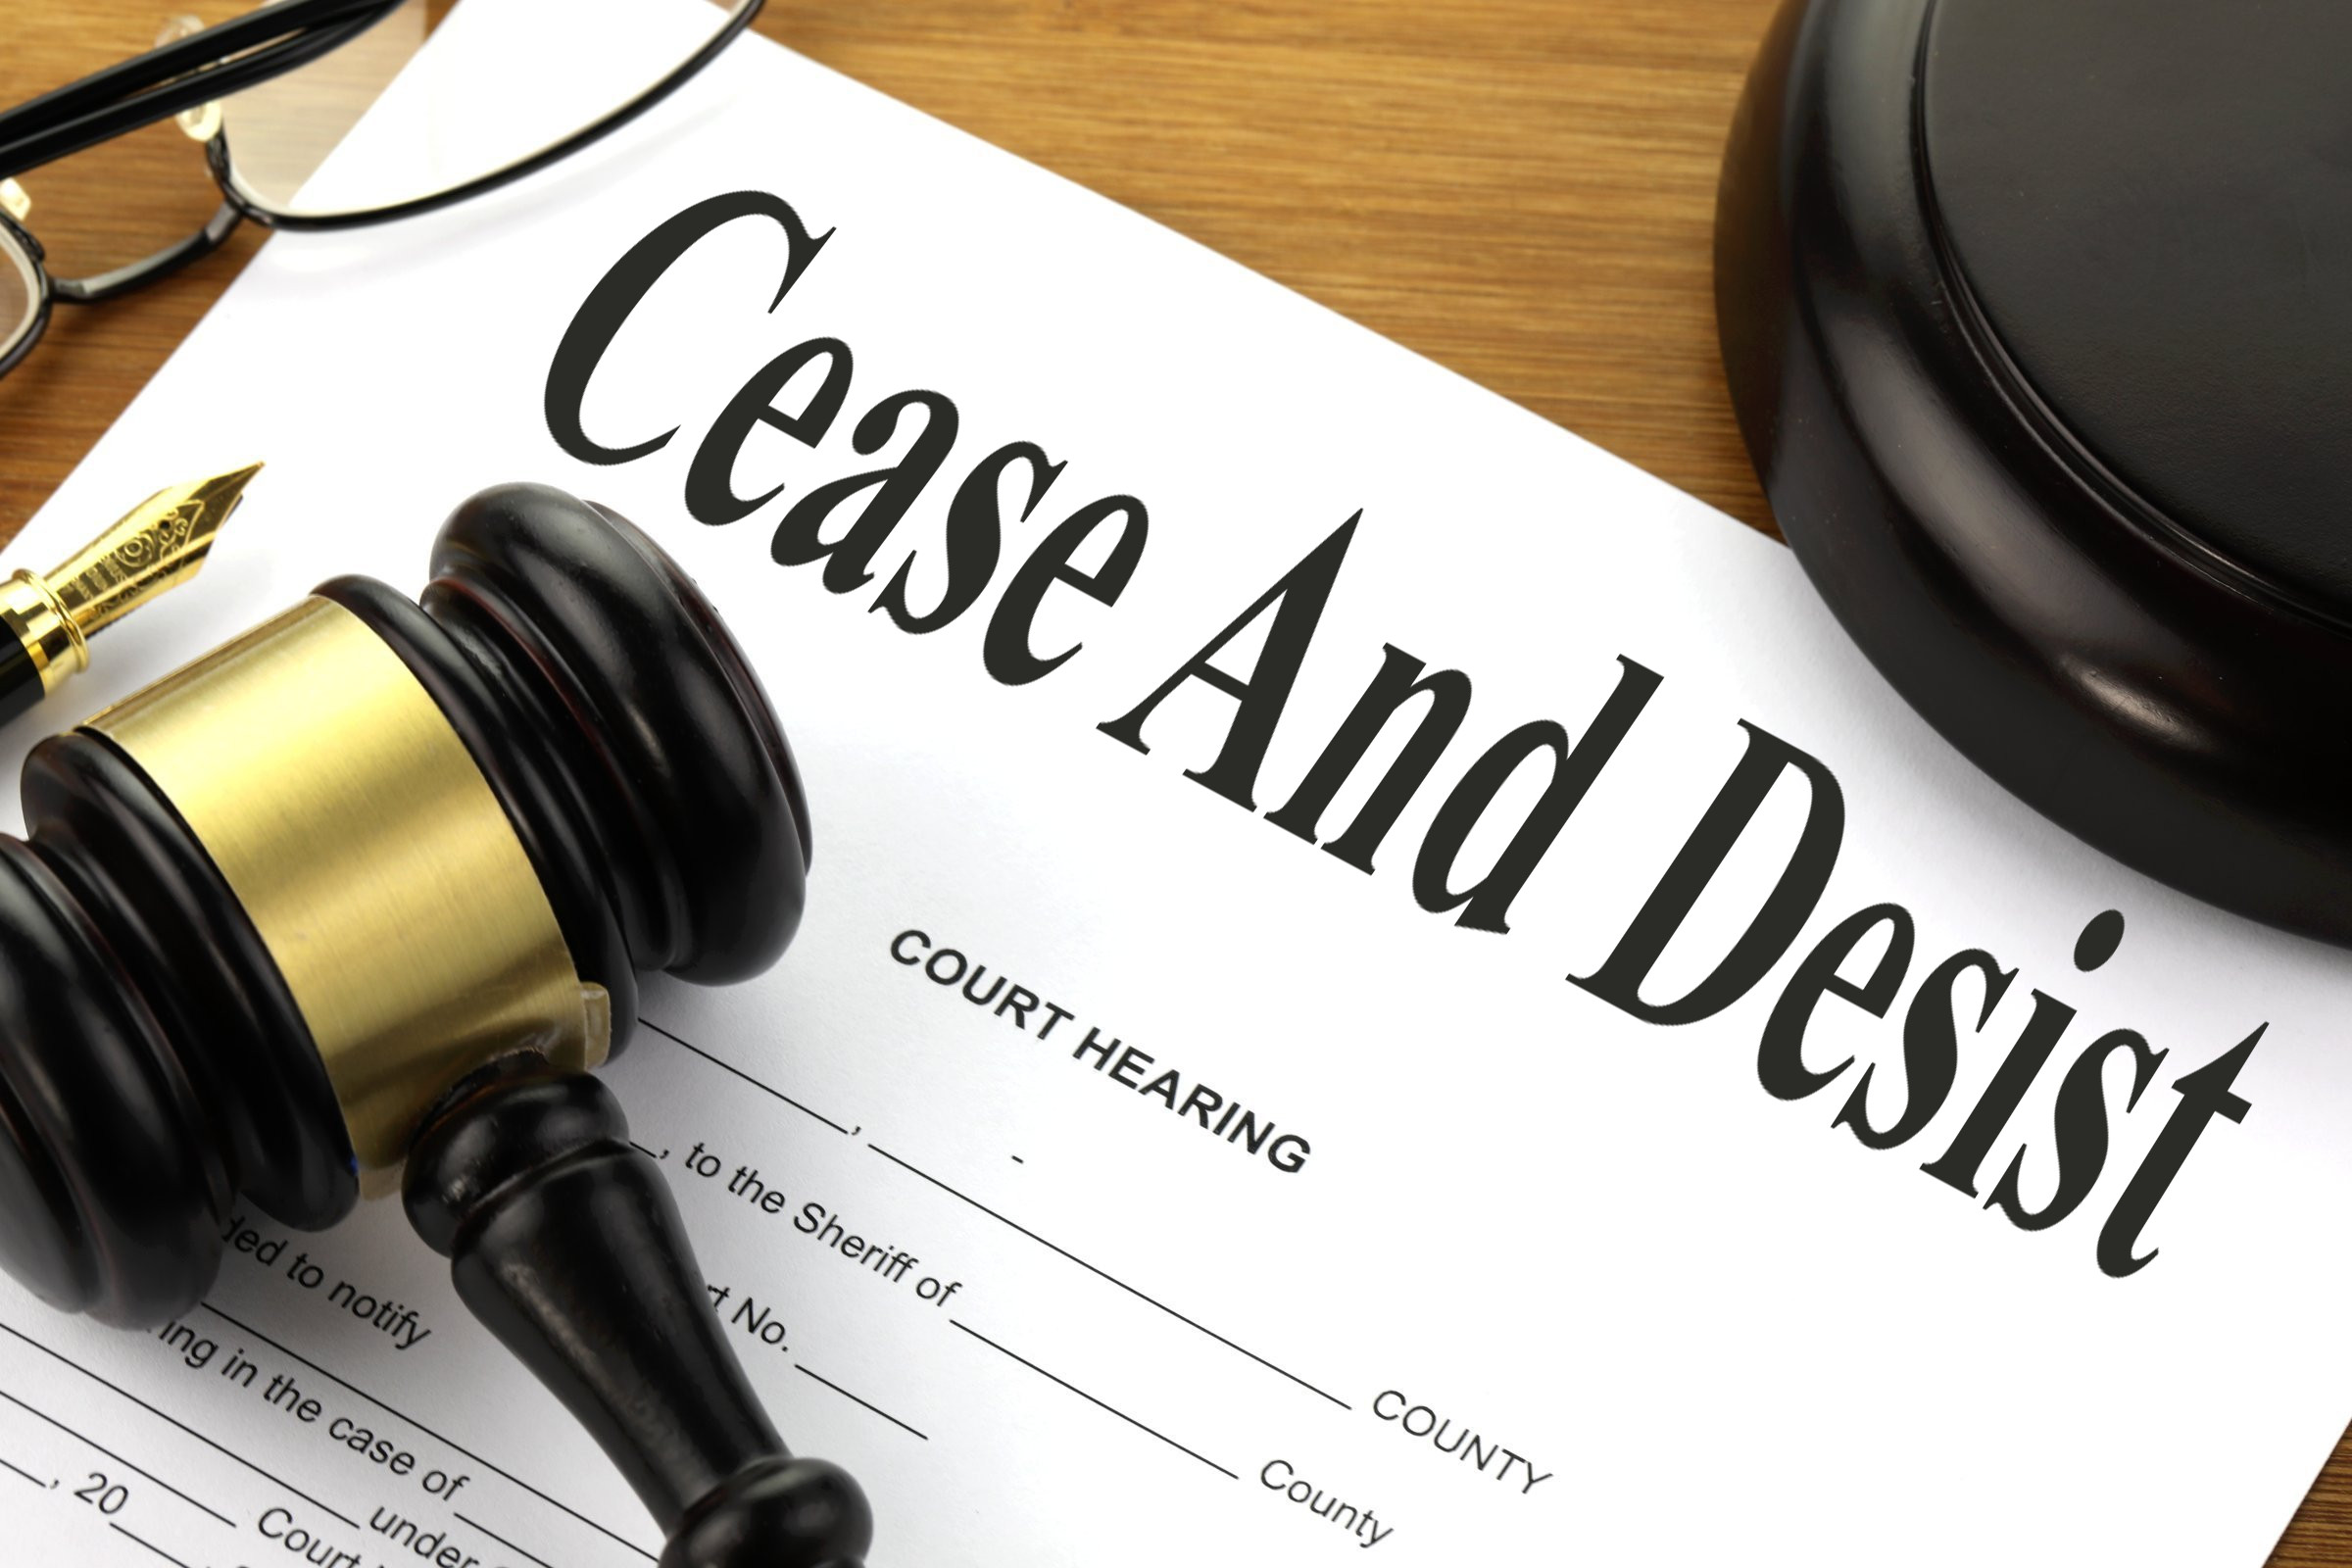  Cease And Desist Free Of Charge Creative Commons Legal 1 Image